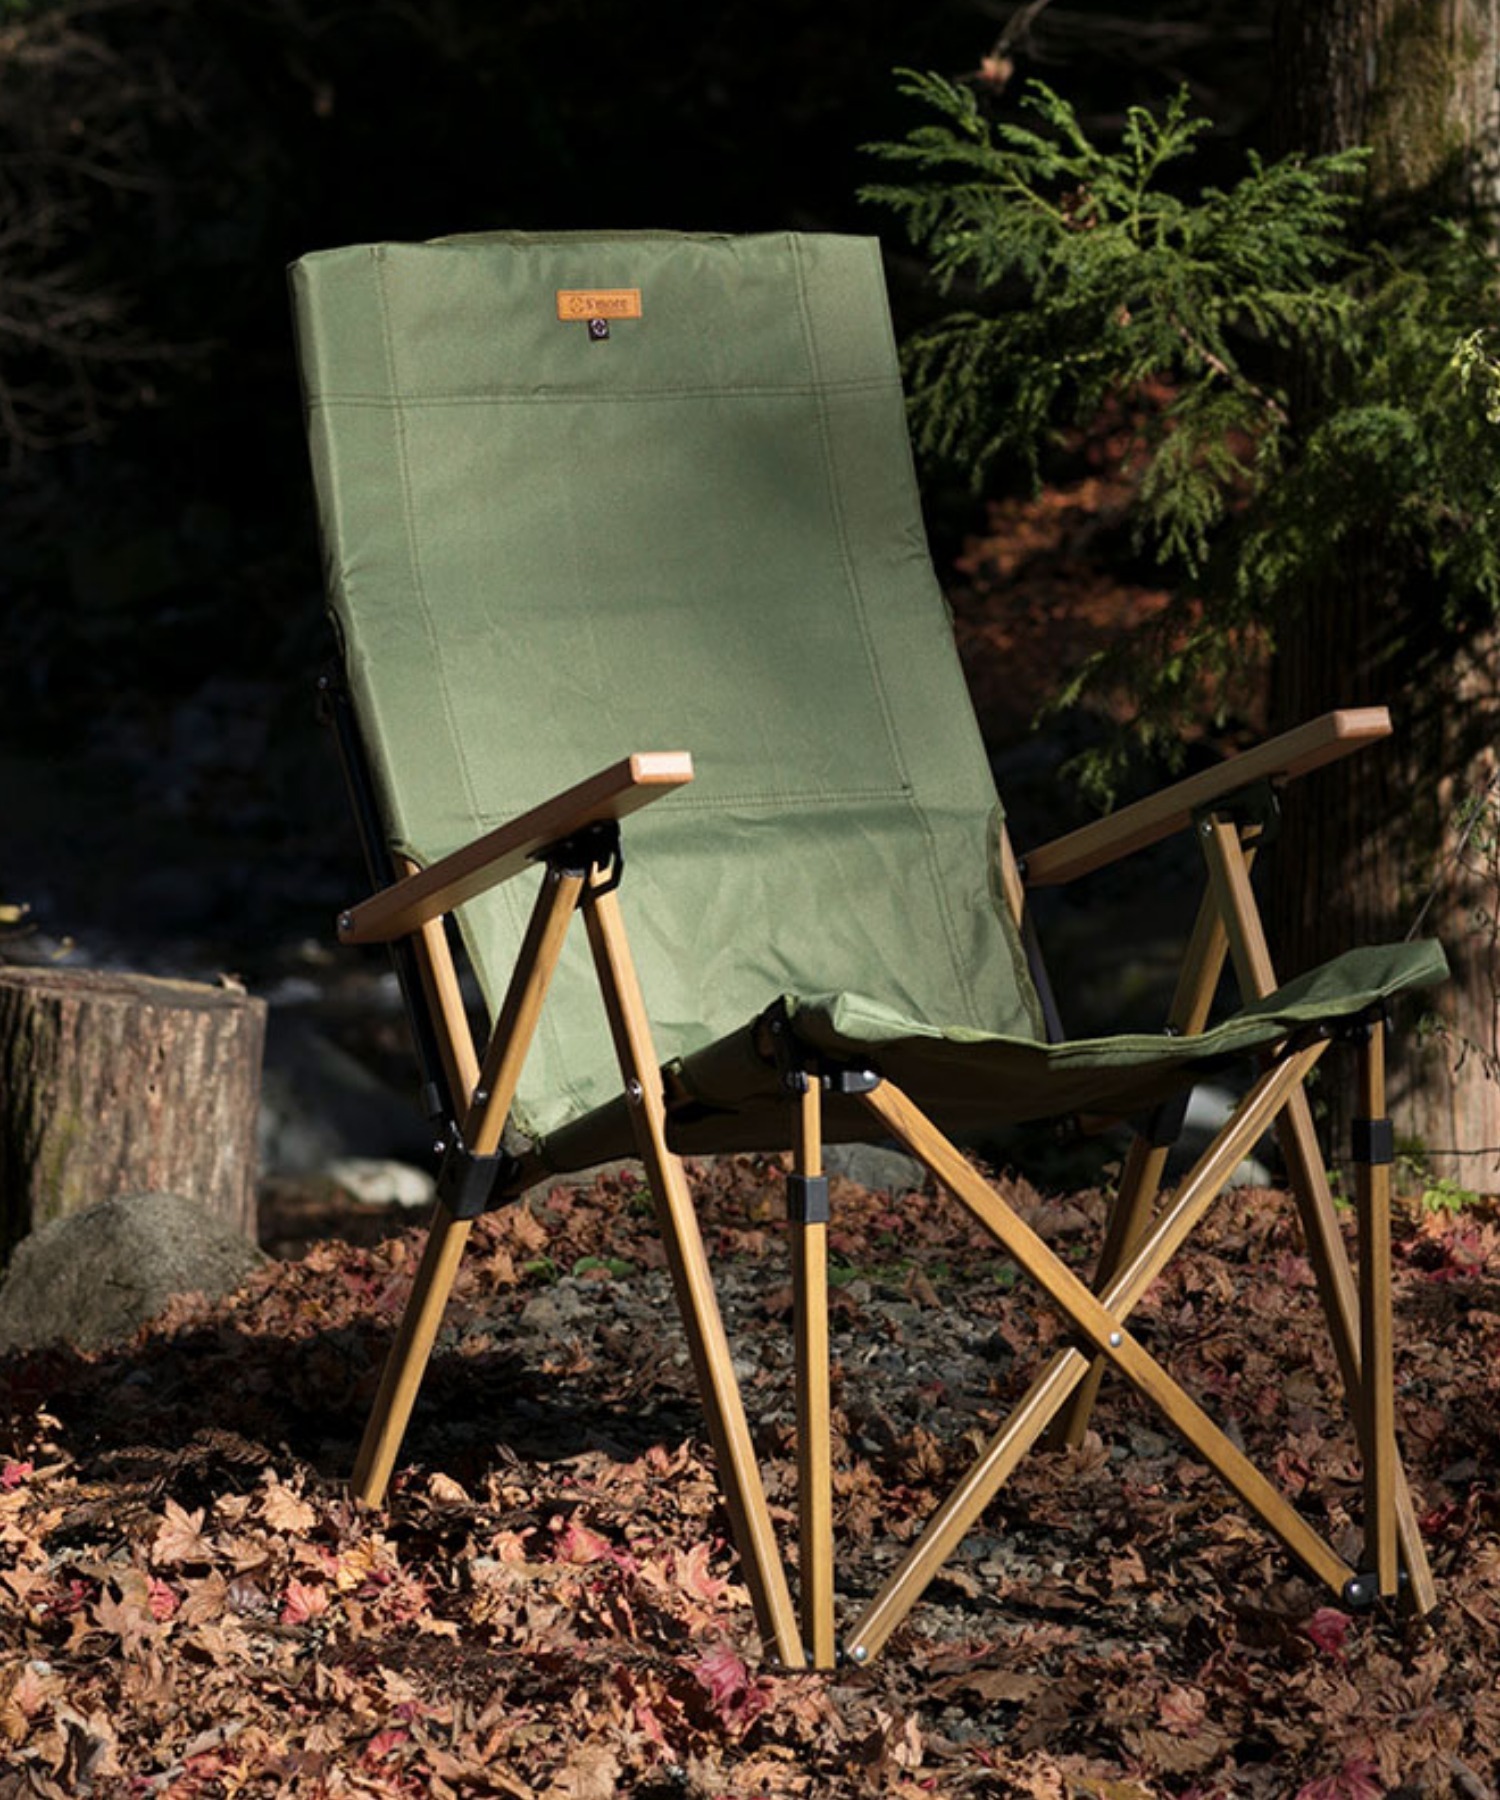 smore】S'more / High back reclining chair ハイバックリクライニング